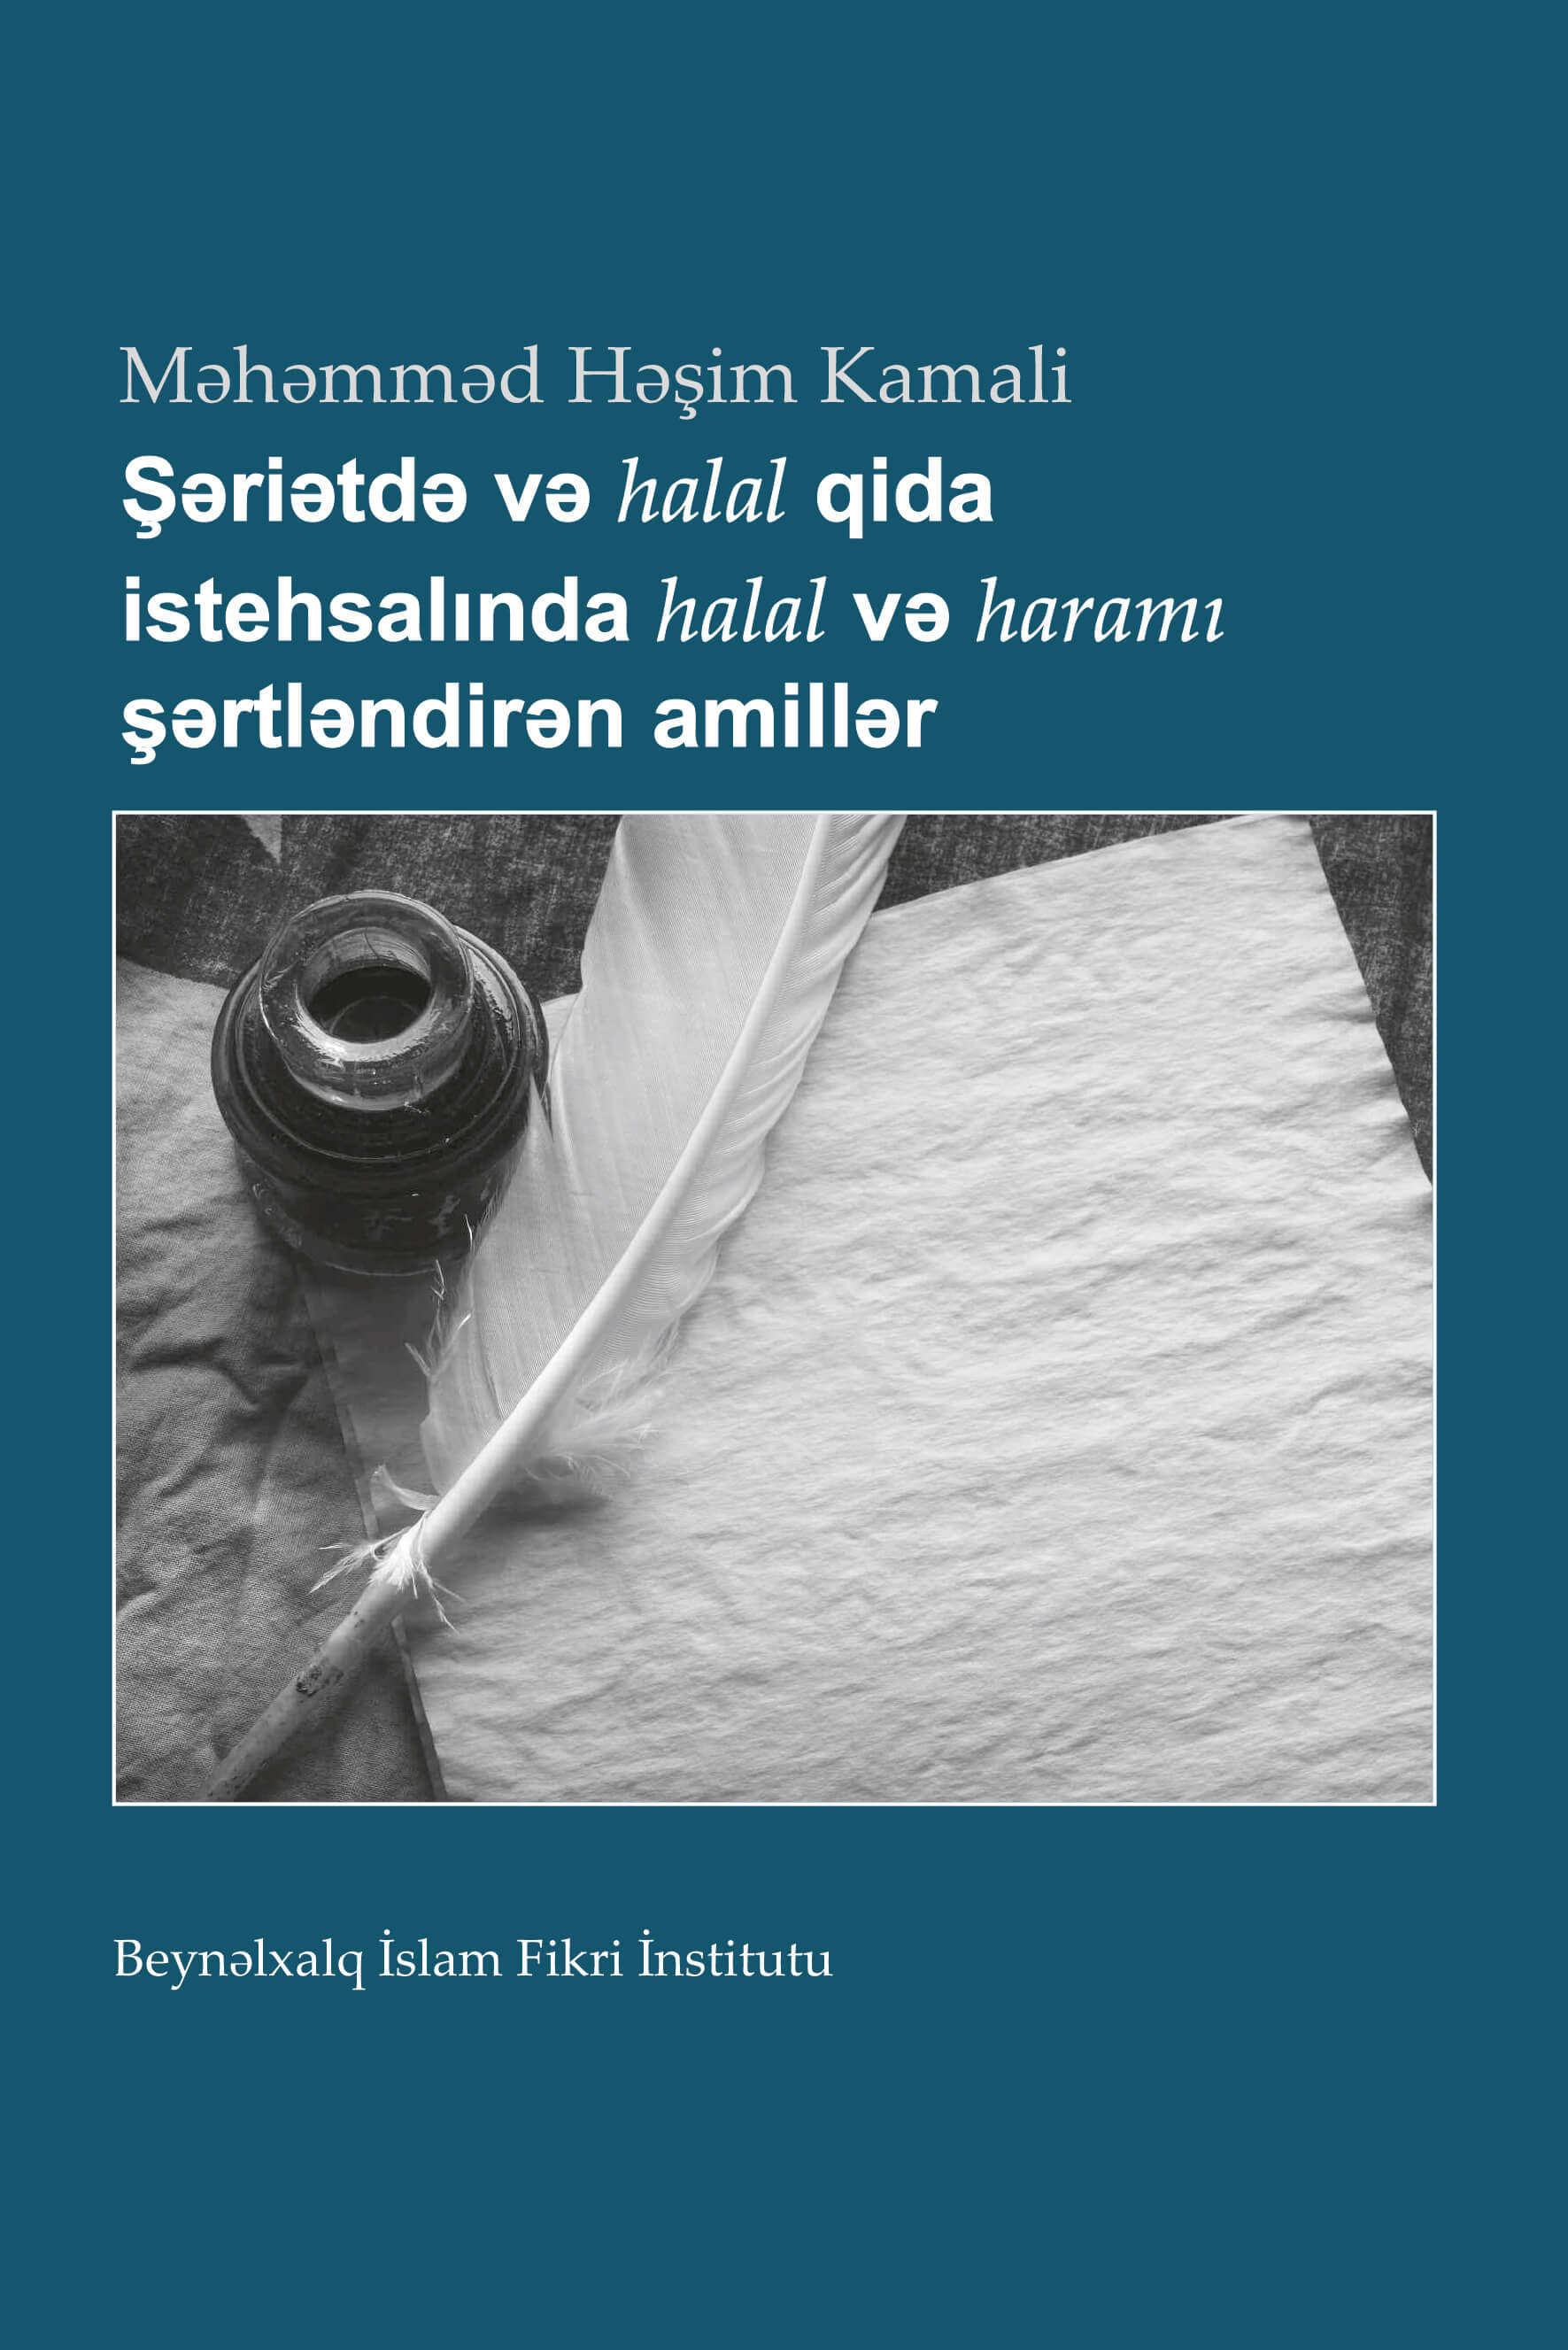 Azeri: The Parameters of Halal and Haram in Shariah and the Halal Industry (Occasional Papers Series 23)